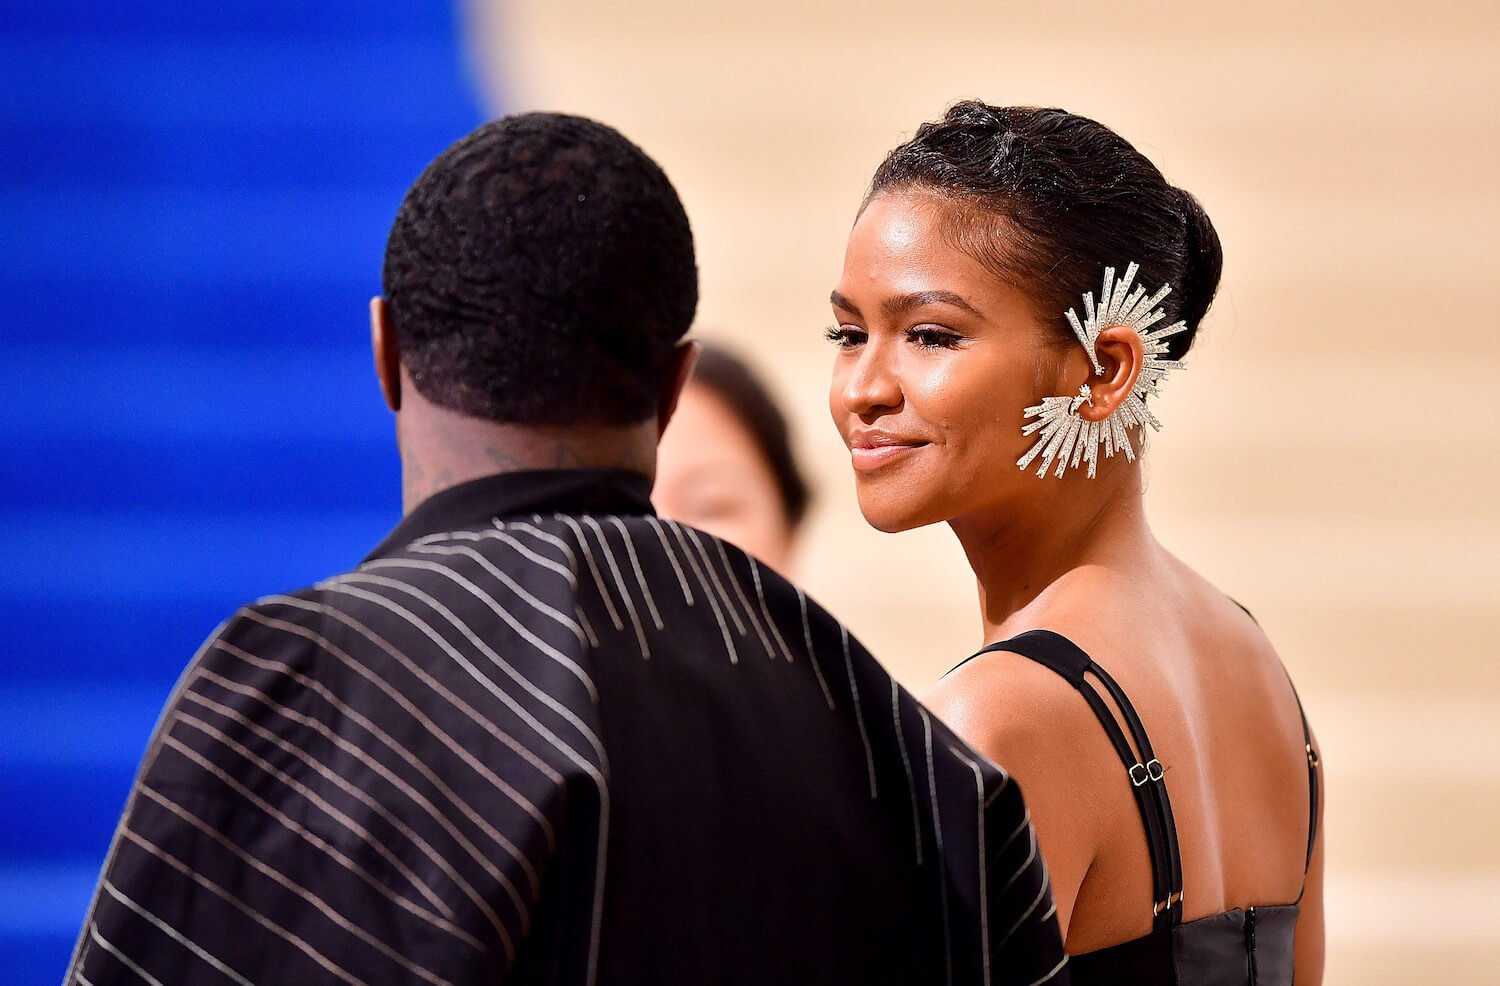 Sean 'P. Diddy' Combs and Casandra 'Cassie' Ventura from the back at the Met Gala in 2017